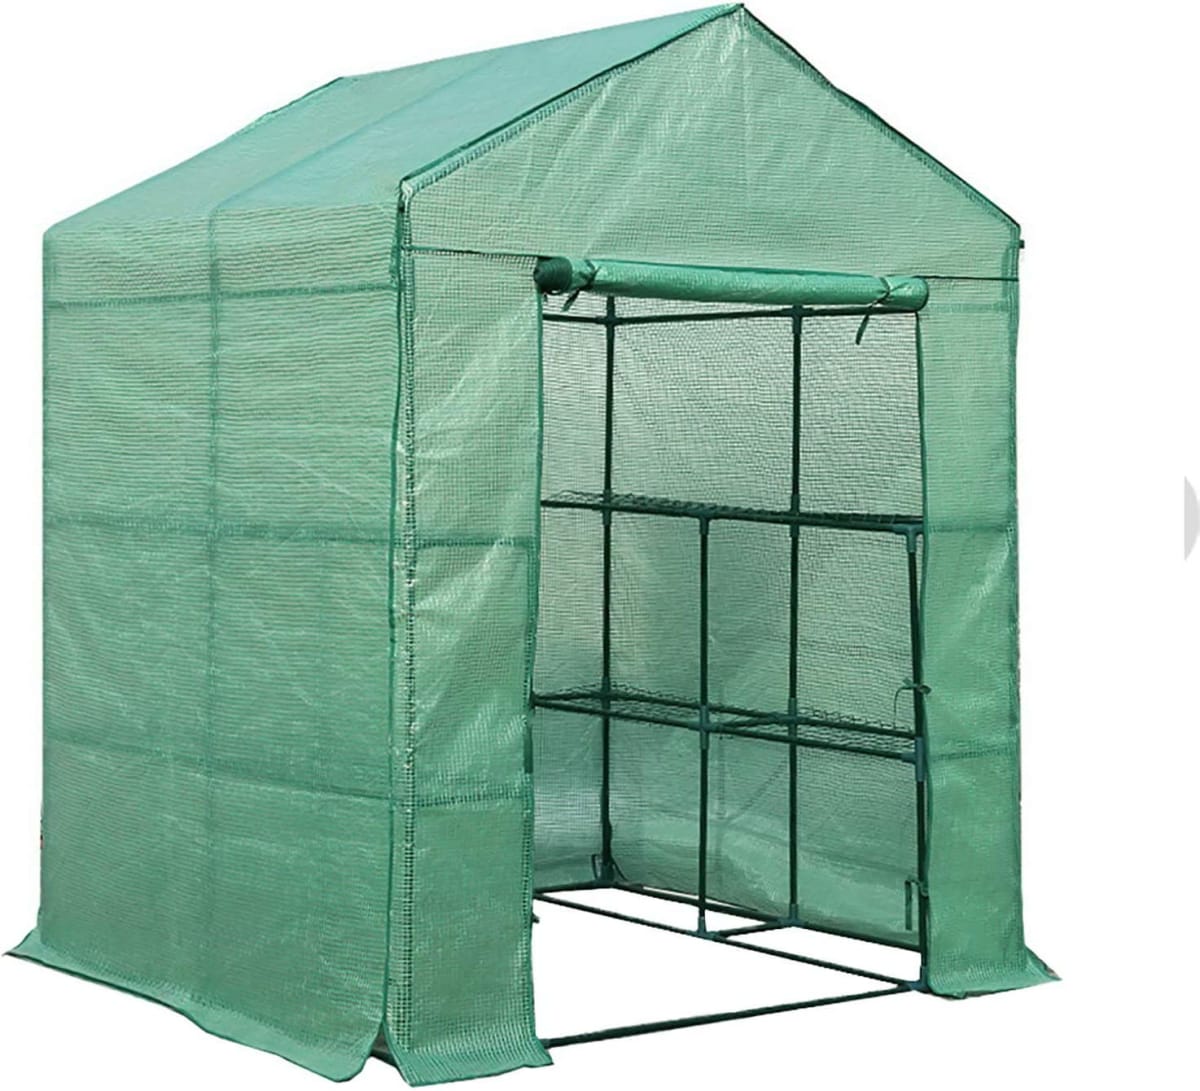 8 Shelves Greenhouse Tunnel Plant Stand Garden Storage Grow Sheds